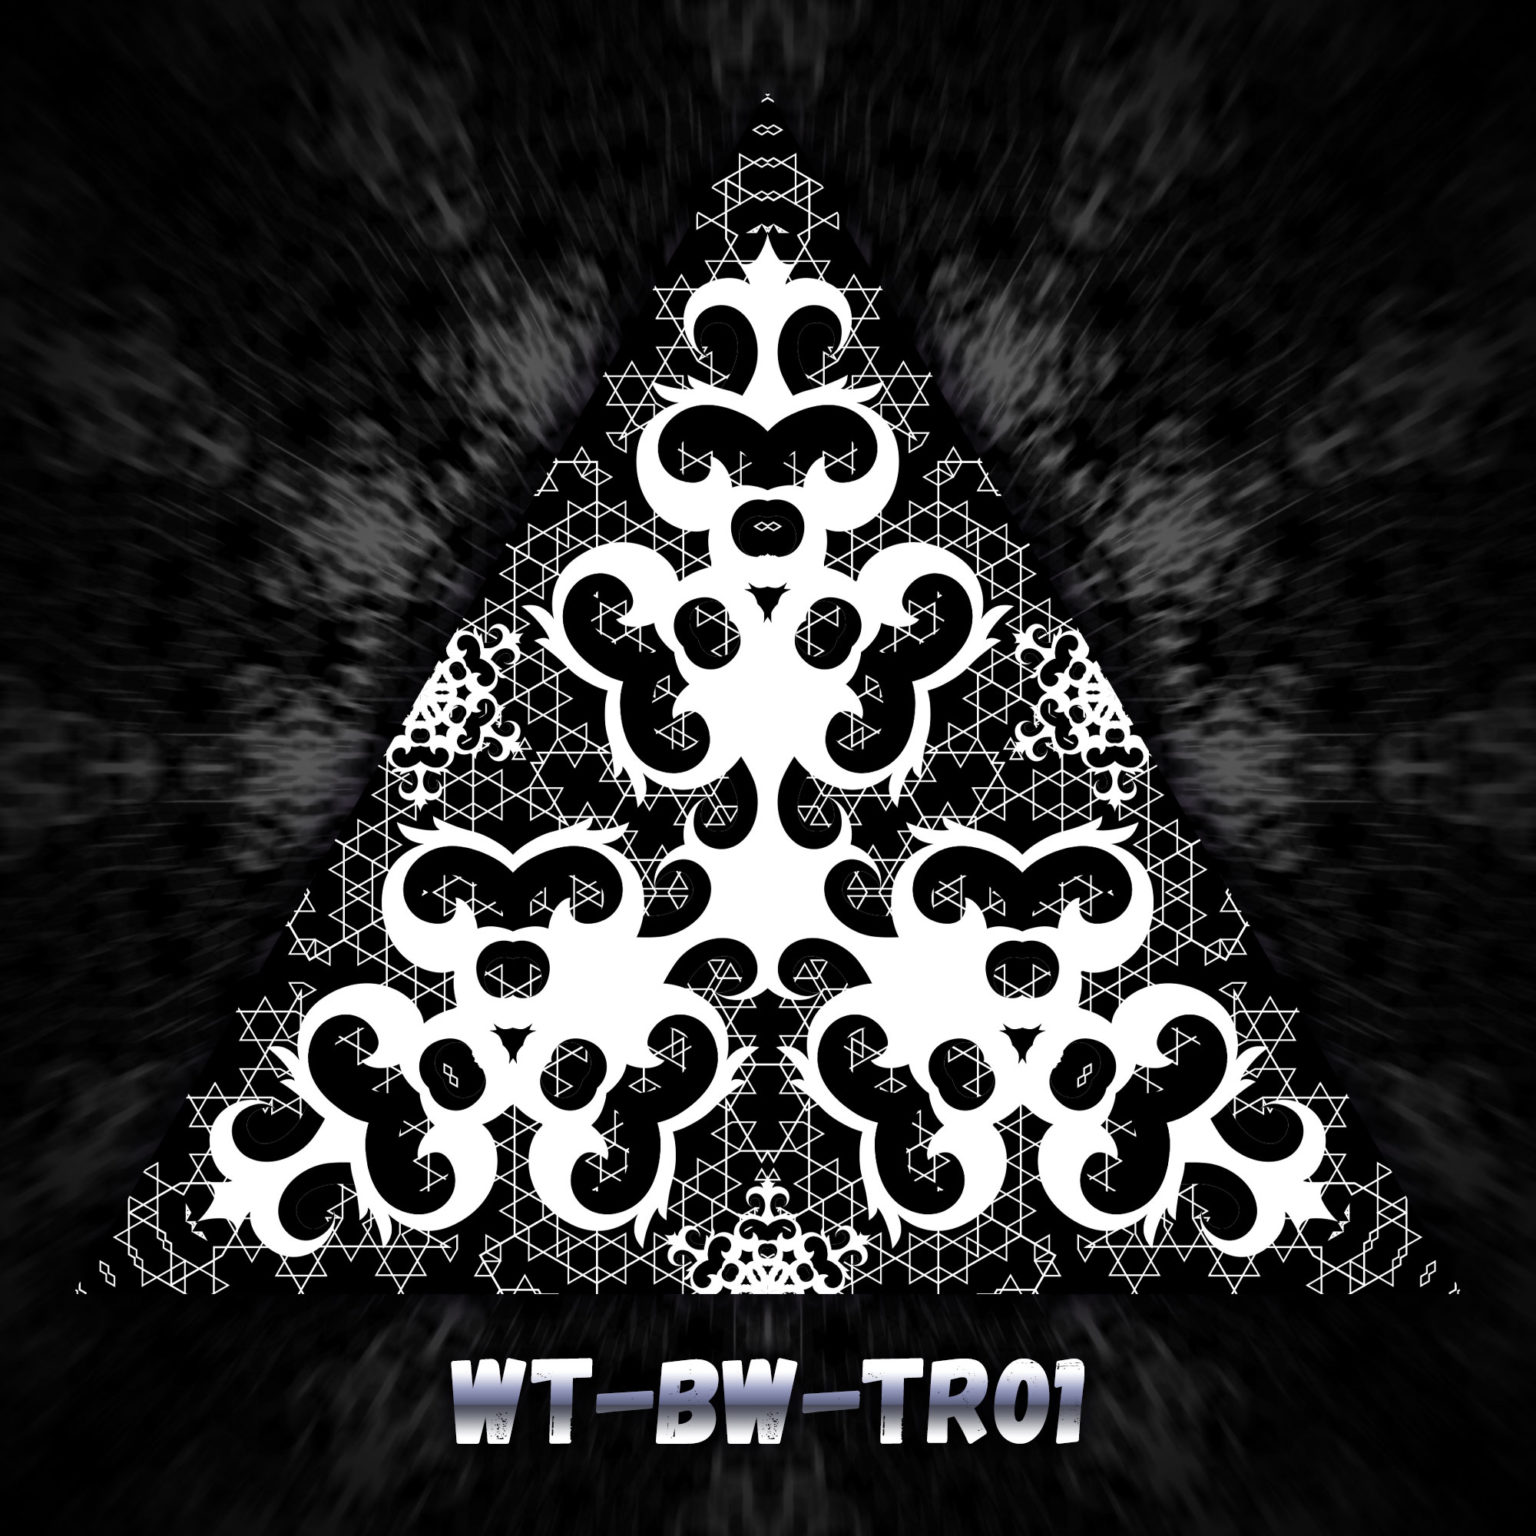 Winter Tale - WT-BW-TR01 - Black Dragons - Psychedelic Black&White Ceiling Decoration Canopy - Triangle Design Preview